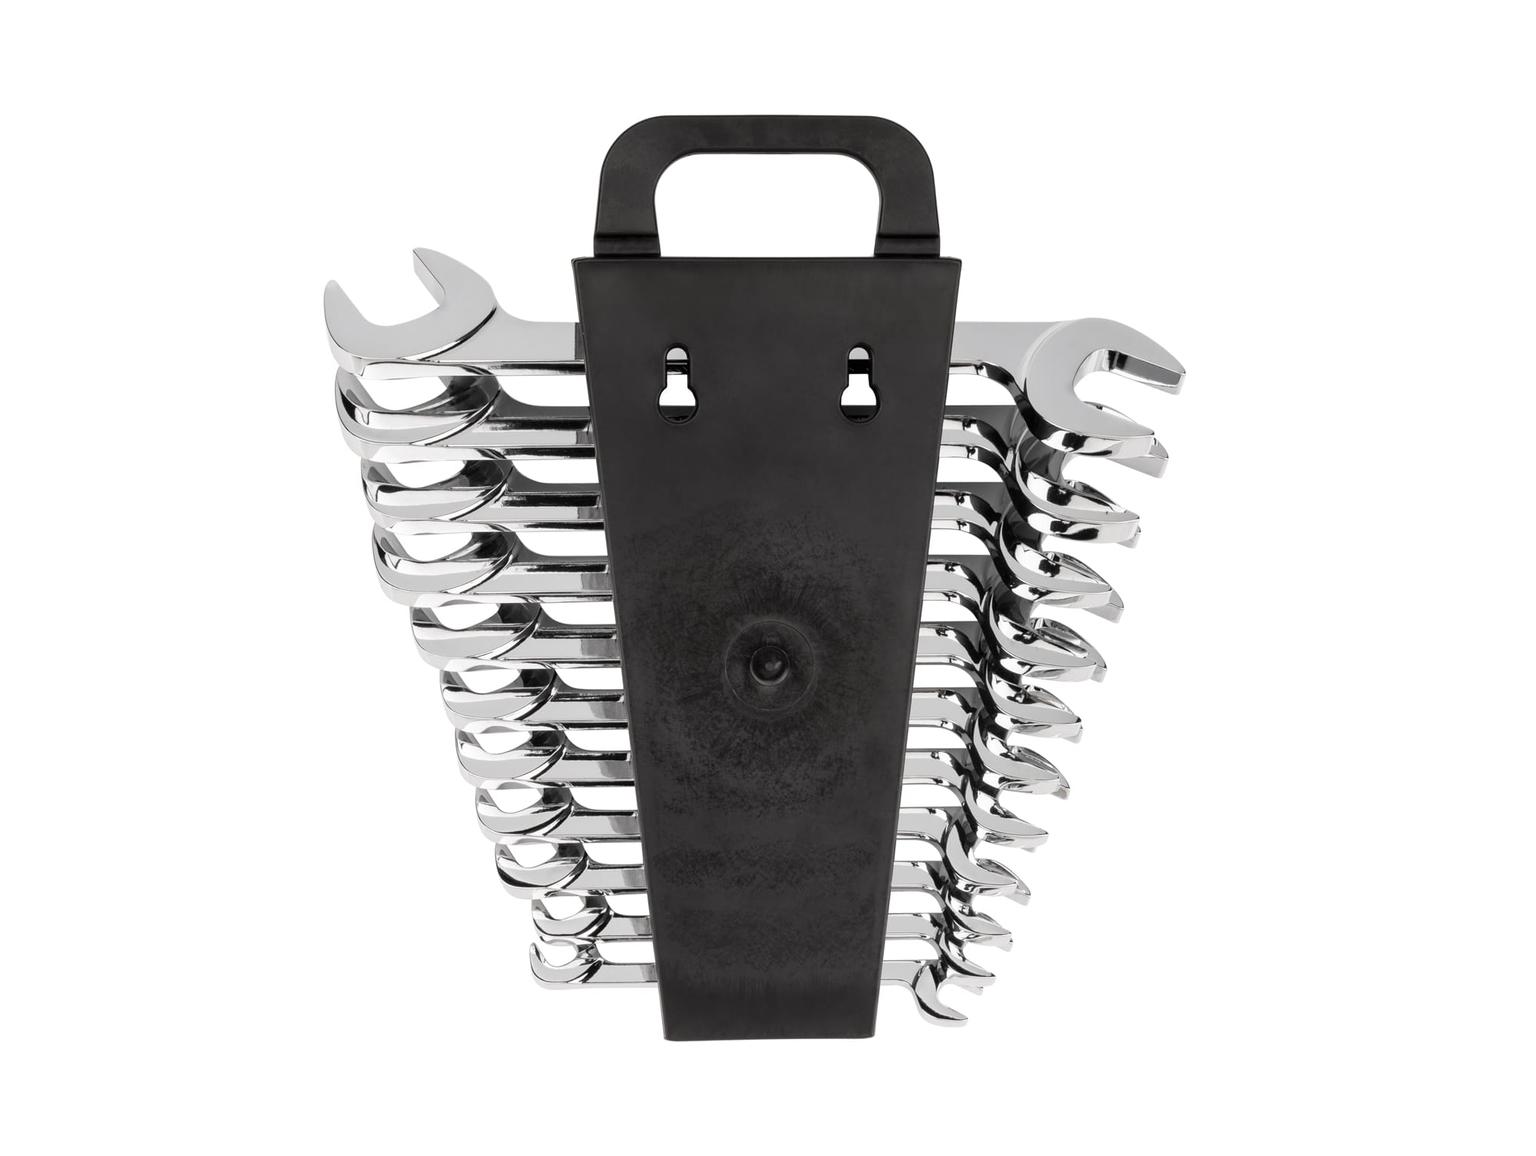 TEKTON WAE91103-T Angle Head Open End Wrench Set with Holder, 11-Piece (1/4 - 3/4 in.)